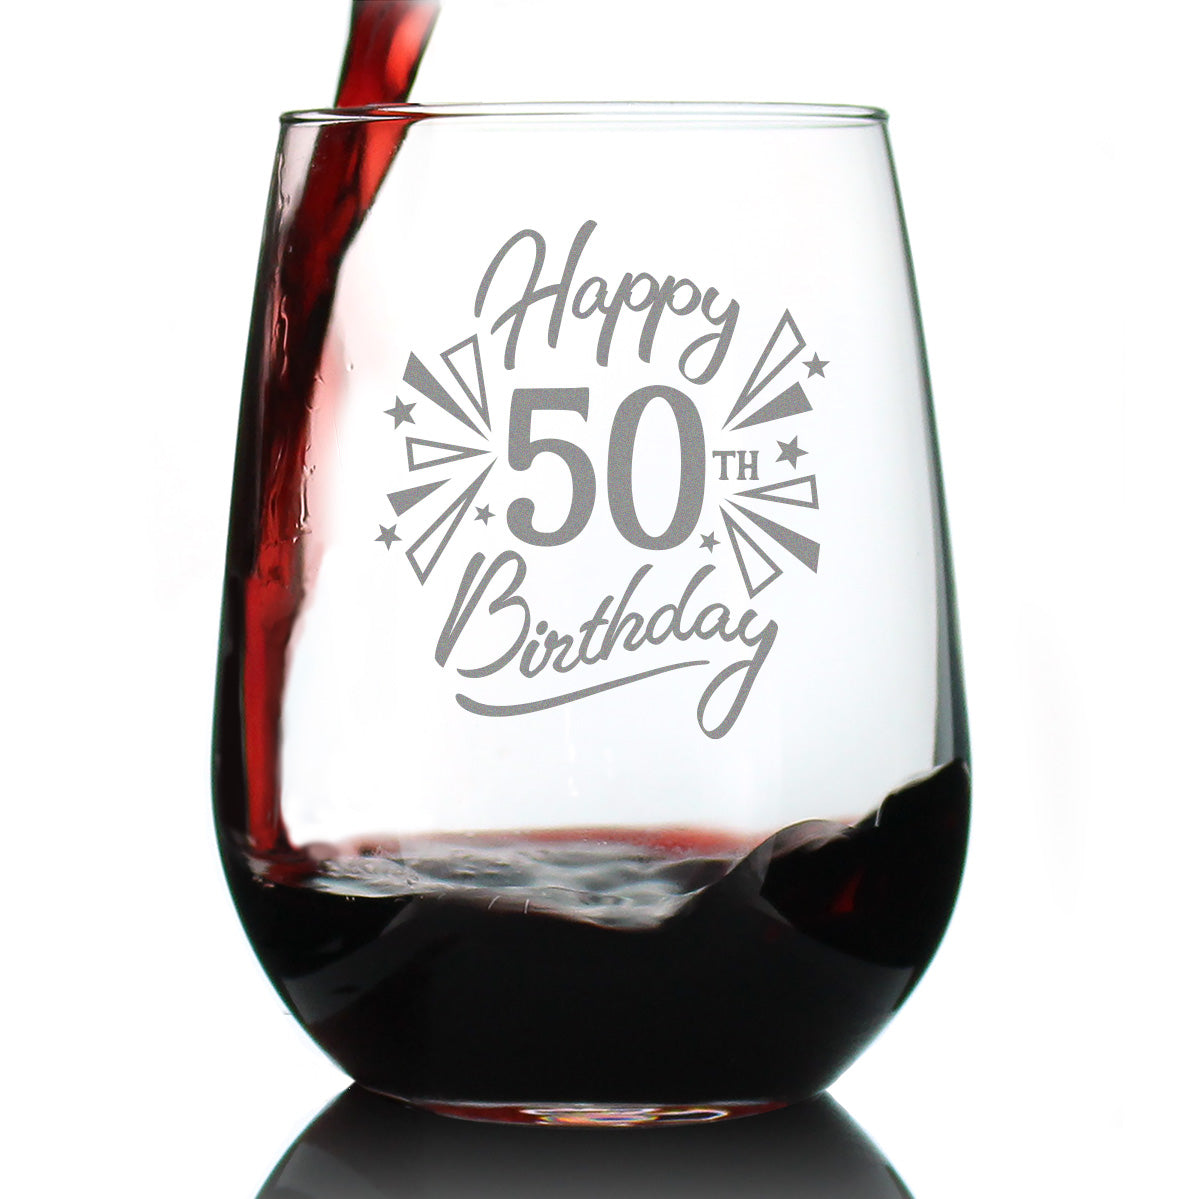 Happy 50th Birthday - Stemless Wine Glass Gifts for Women &amp; Men Turning 50 - Bday Party Decor - Large Glasses 17 Oz